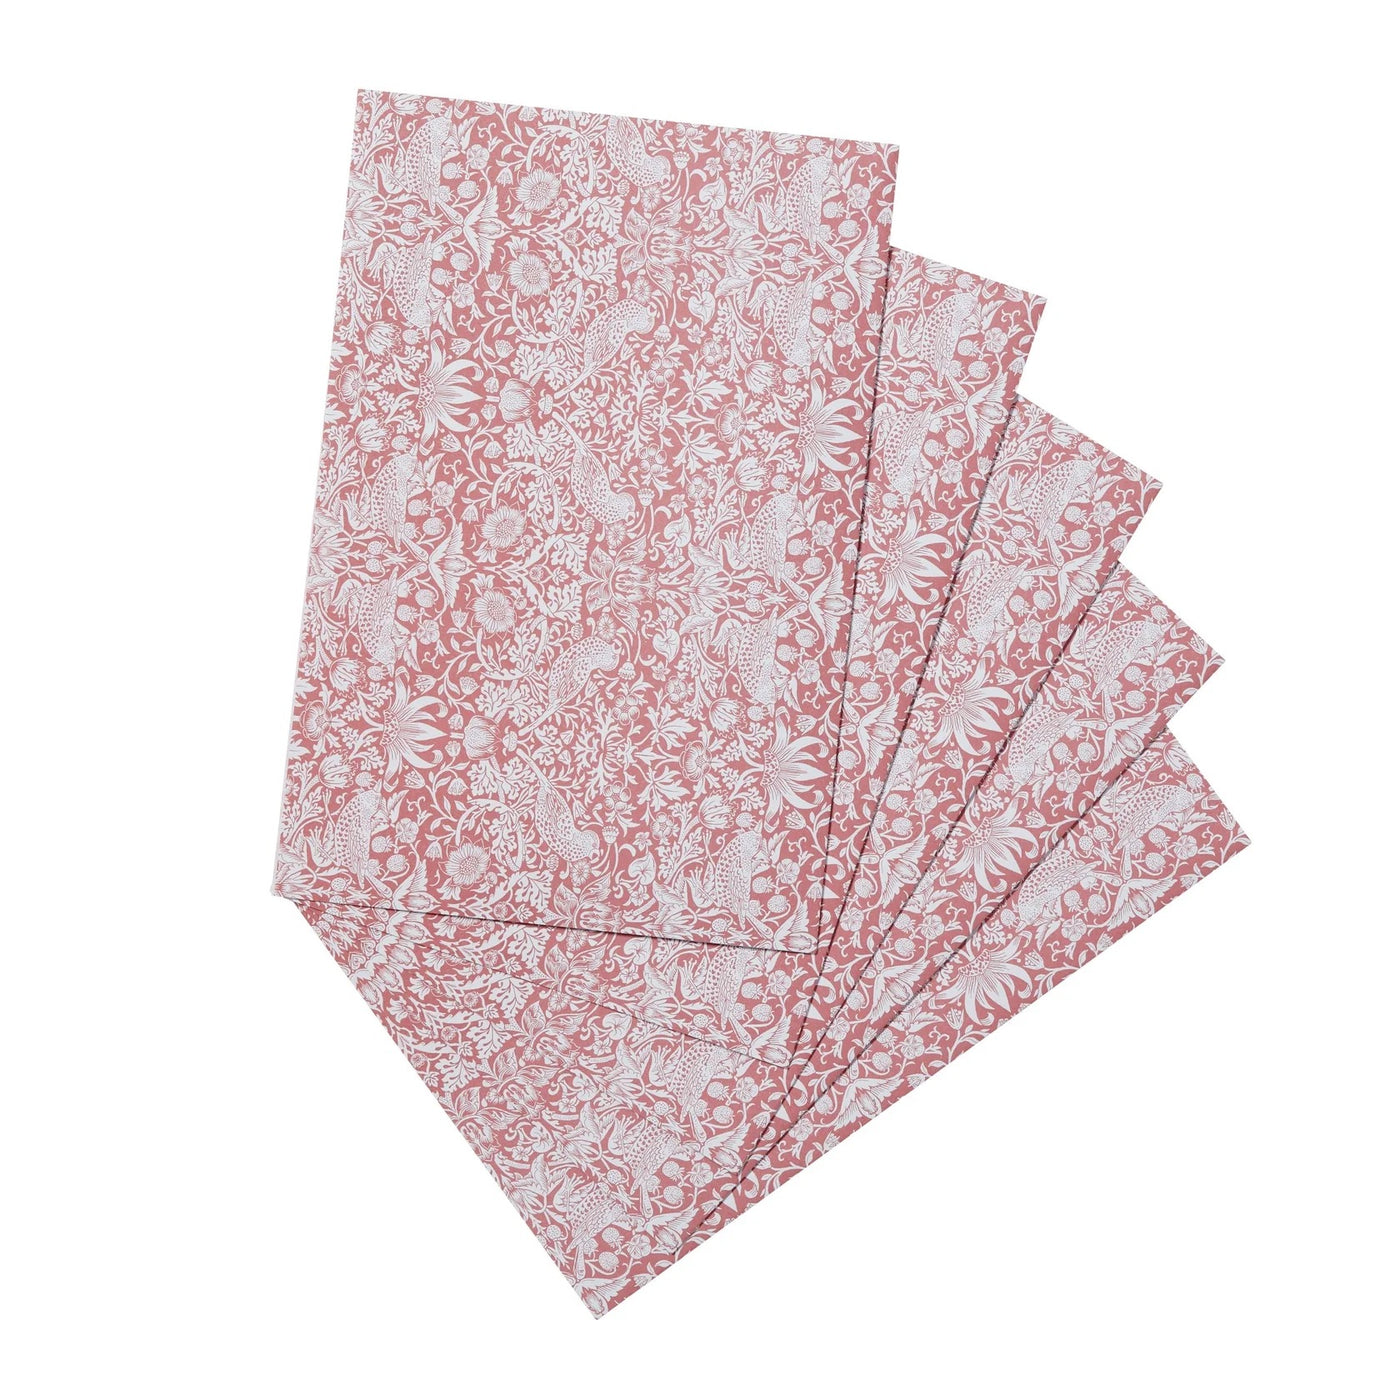 William Morris at Home Patchouli & Red Berry Drawer Liners - (Pack of 5 Sheets)